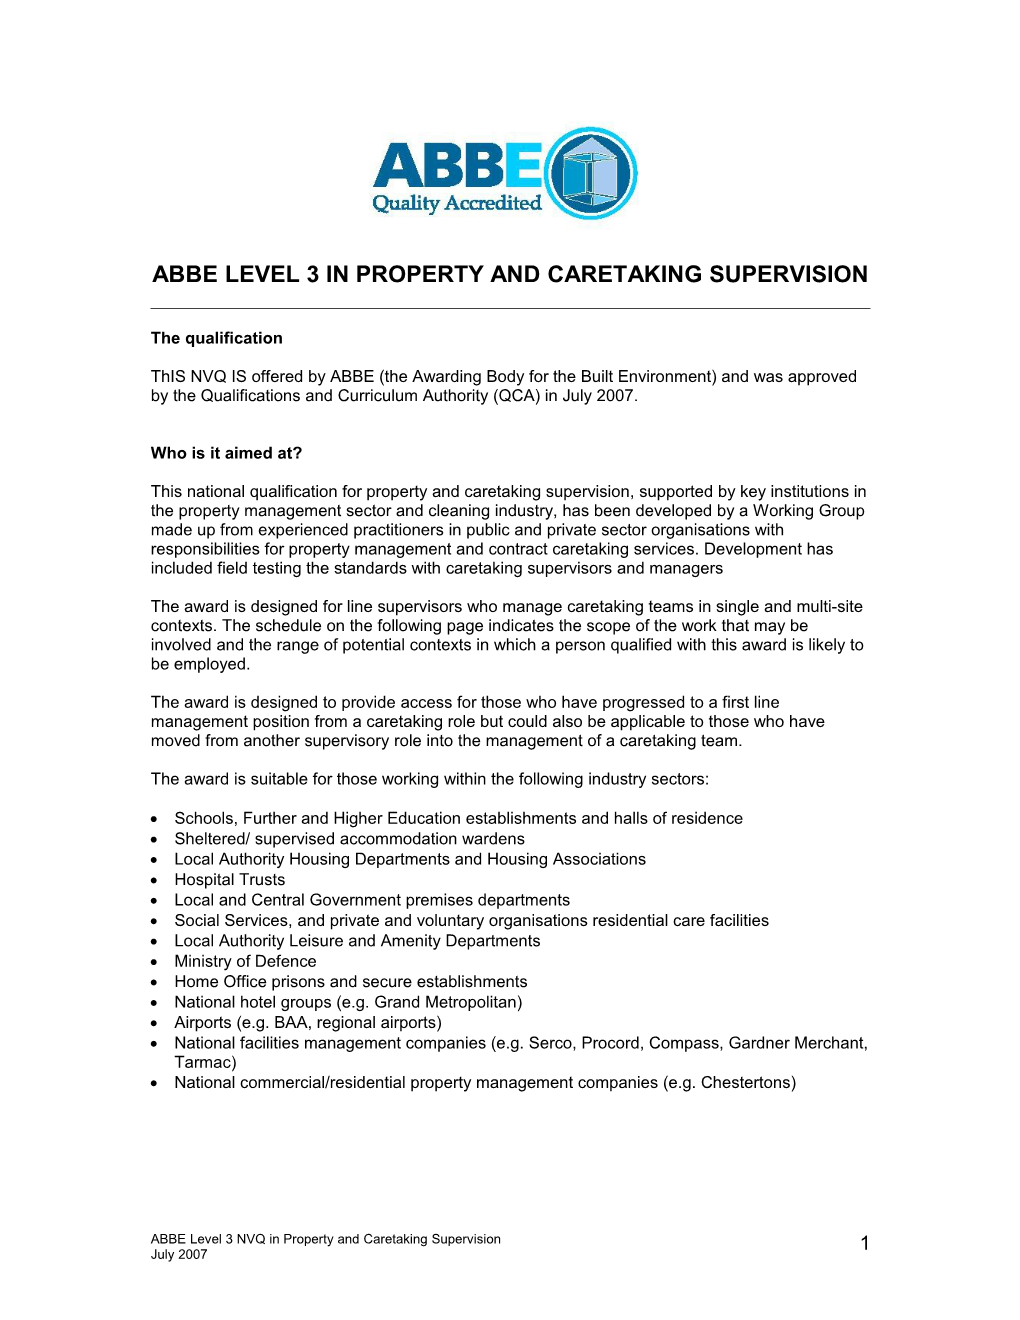 Abbe Level 3 in Property and Caretaking Supervision